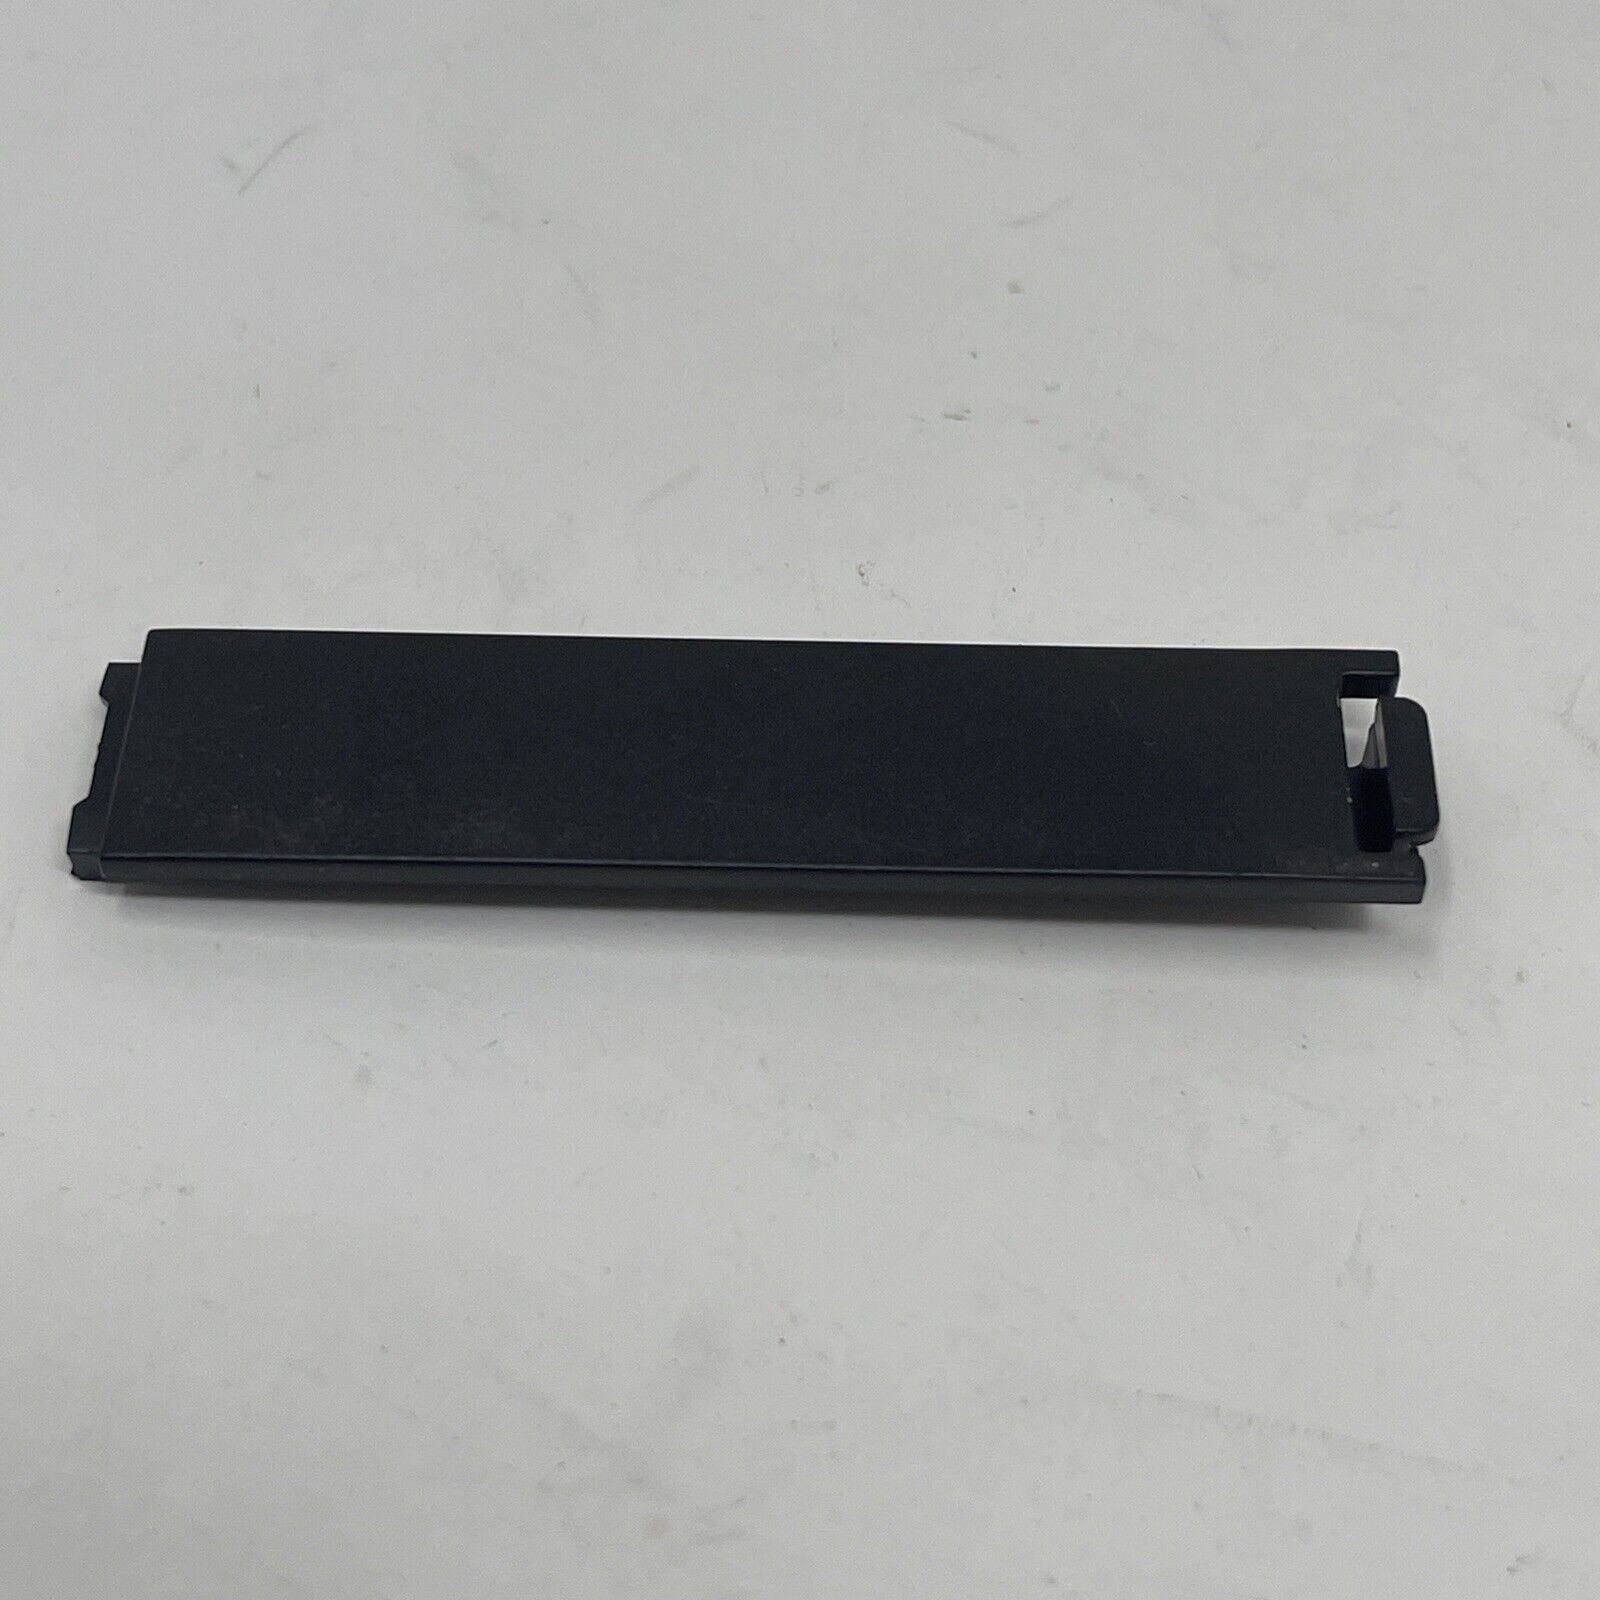 Genuine Replacement Battery Door Cover For Dell Wireless Keyboard KM632